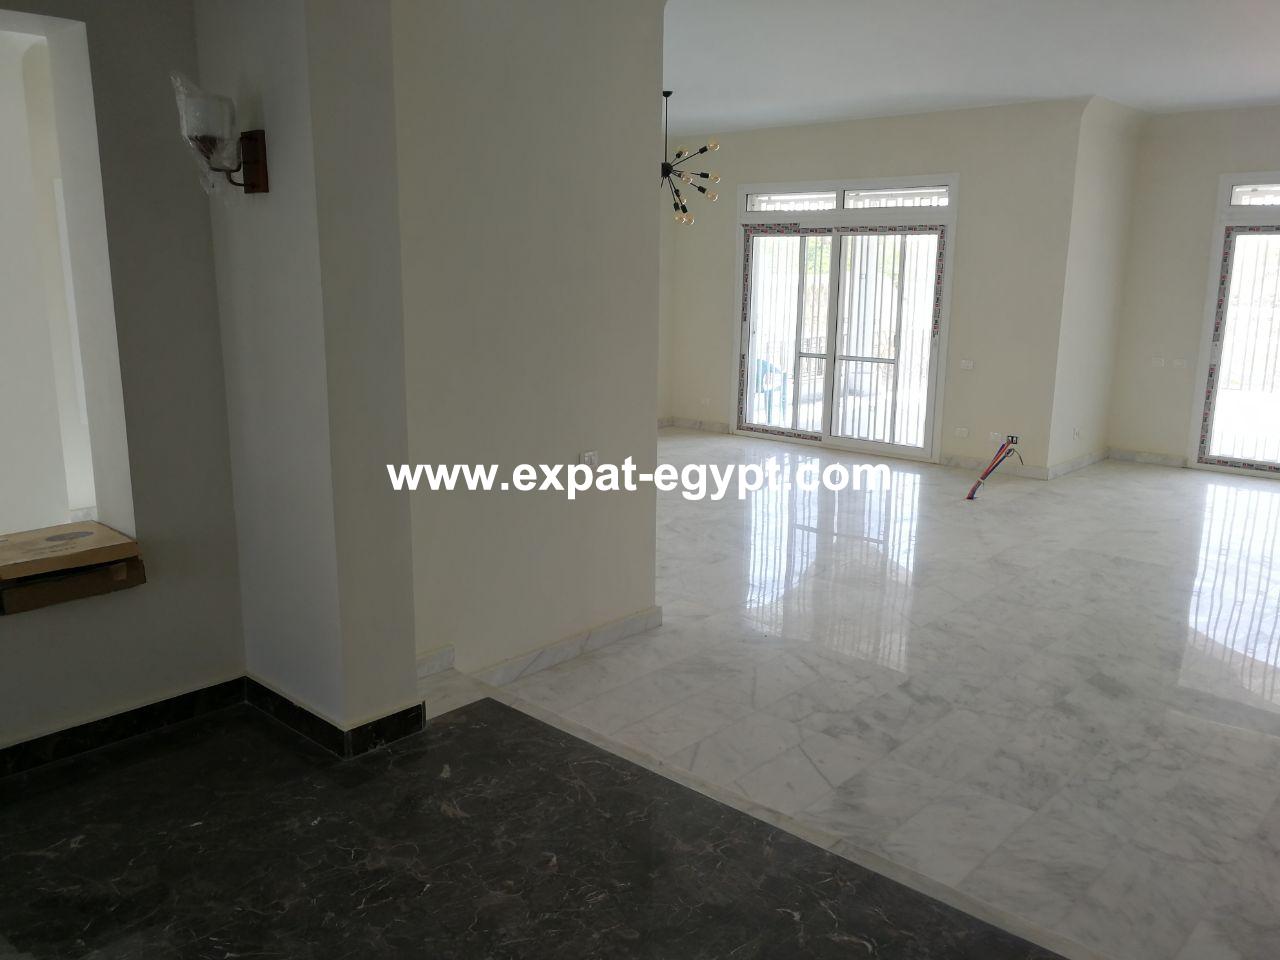 Villa For Sale  in plam hills , 6th october , Cairo , Egypt  